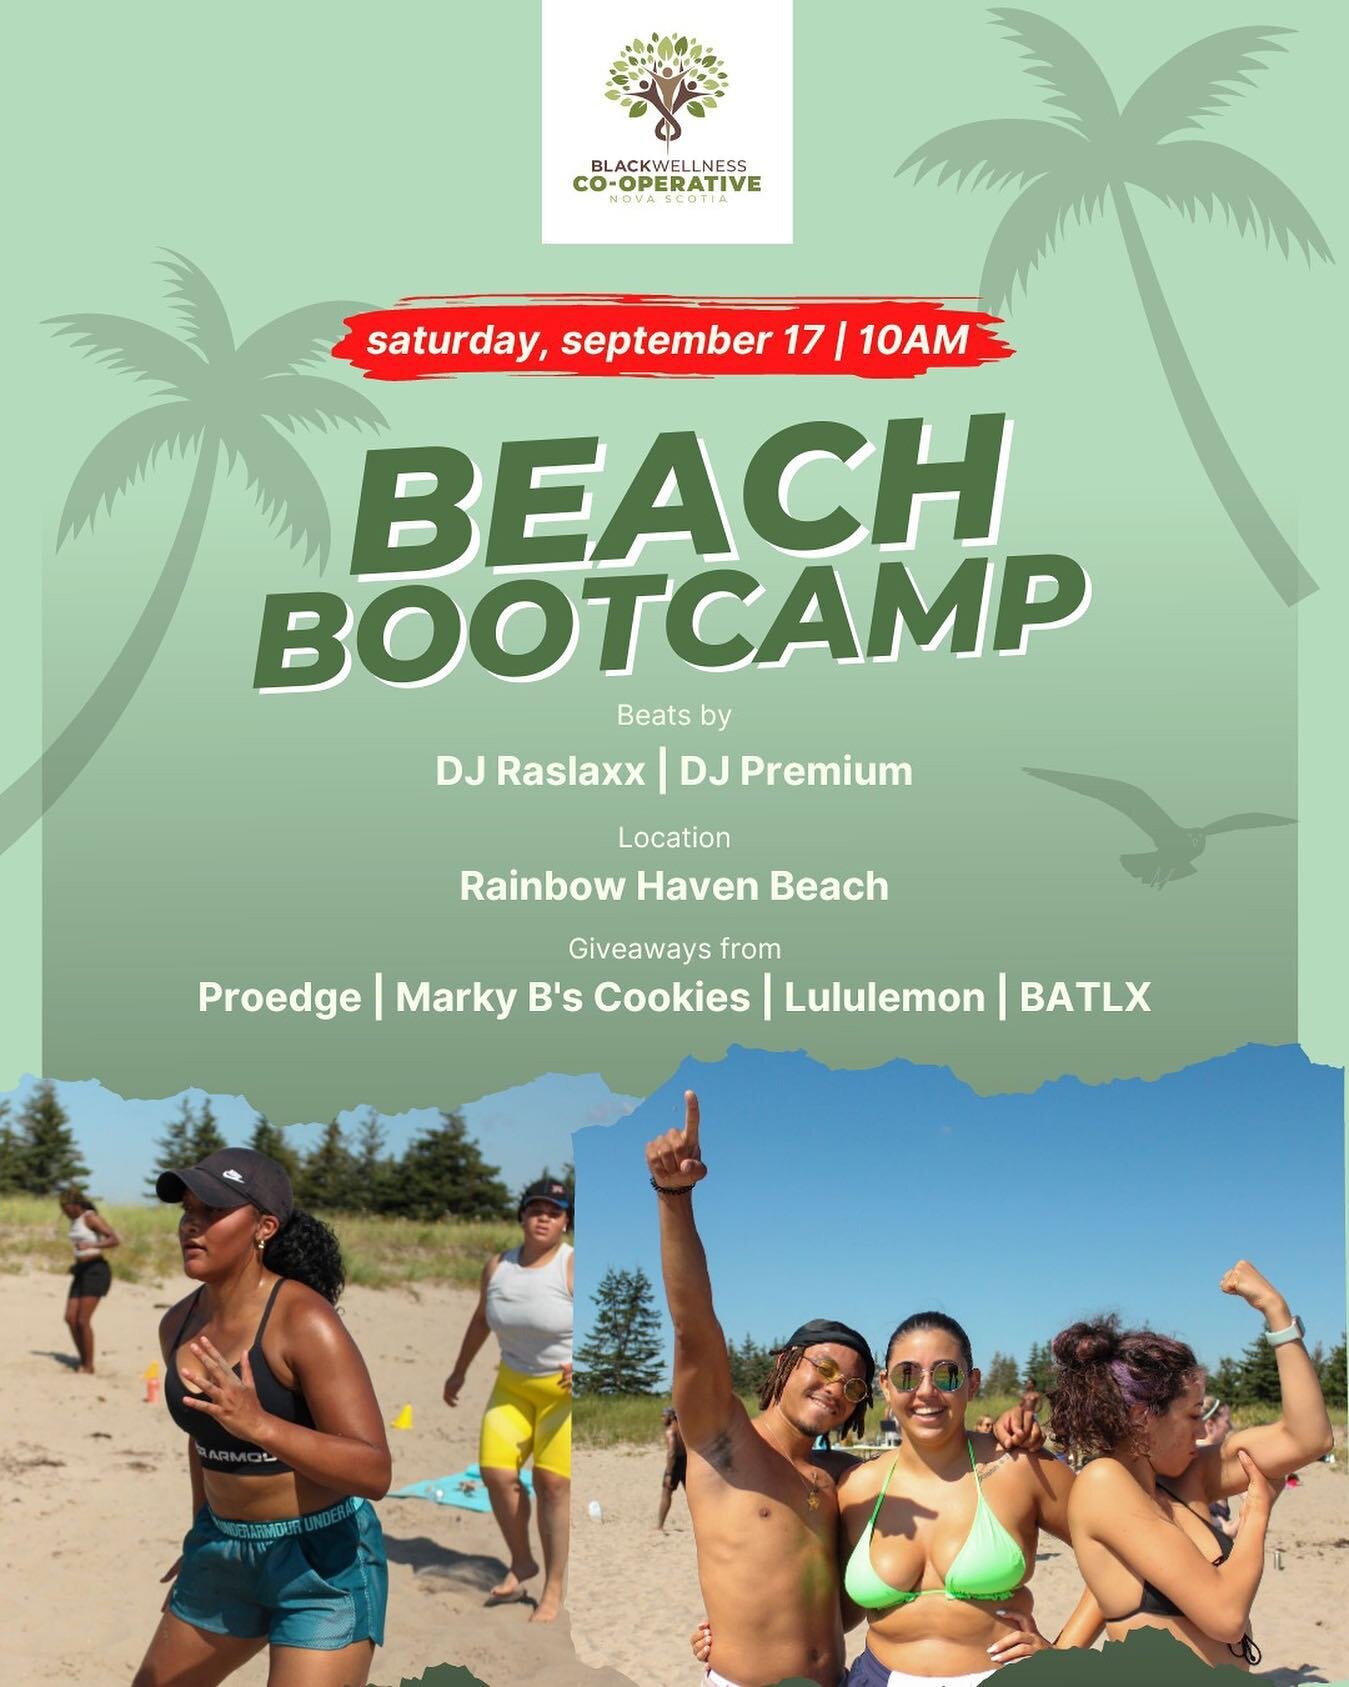 Finally! 🏝 

💪🏾 Beach Bootcamp 
📍Rainbow Haven Beach 
🗓 Saturday,  September 17th 
⏰ 10am! 

Bring your friends and family (all ages welcome) for our end of summer beach bootcamp brought to you by us :) 

Link is in the bio to sign up by donatio